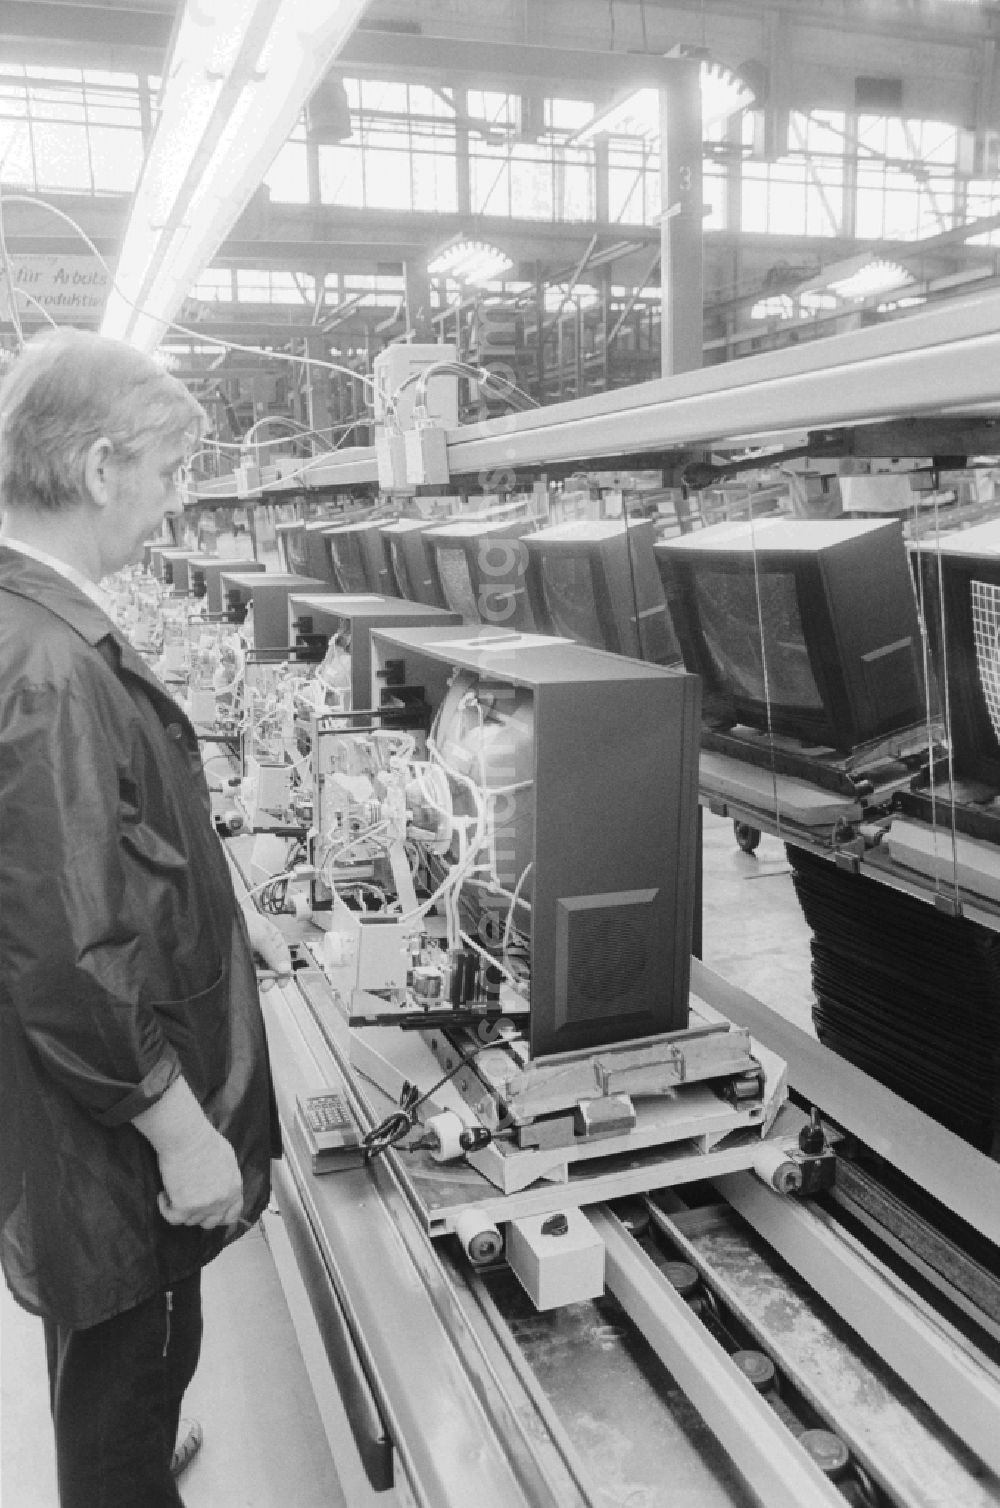 GDR image archive: Staßfurt - Technical installations and production equipment on the conveyor belt of RFT - television equipment production in Stassfurt in the federal state of Saxony-Anhalt on the territory of the former GDR, German Democratic Republic